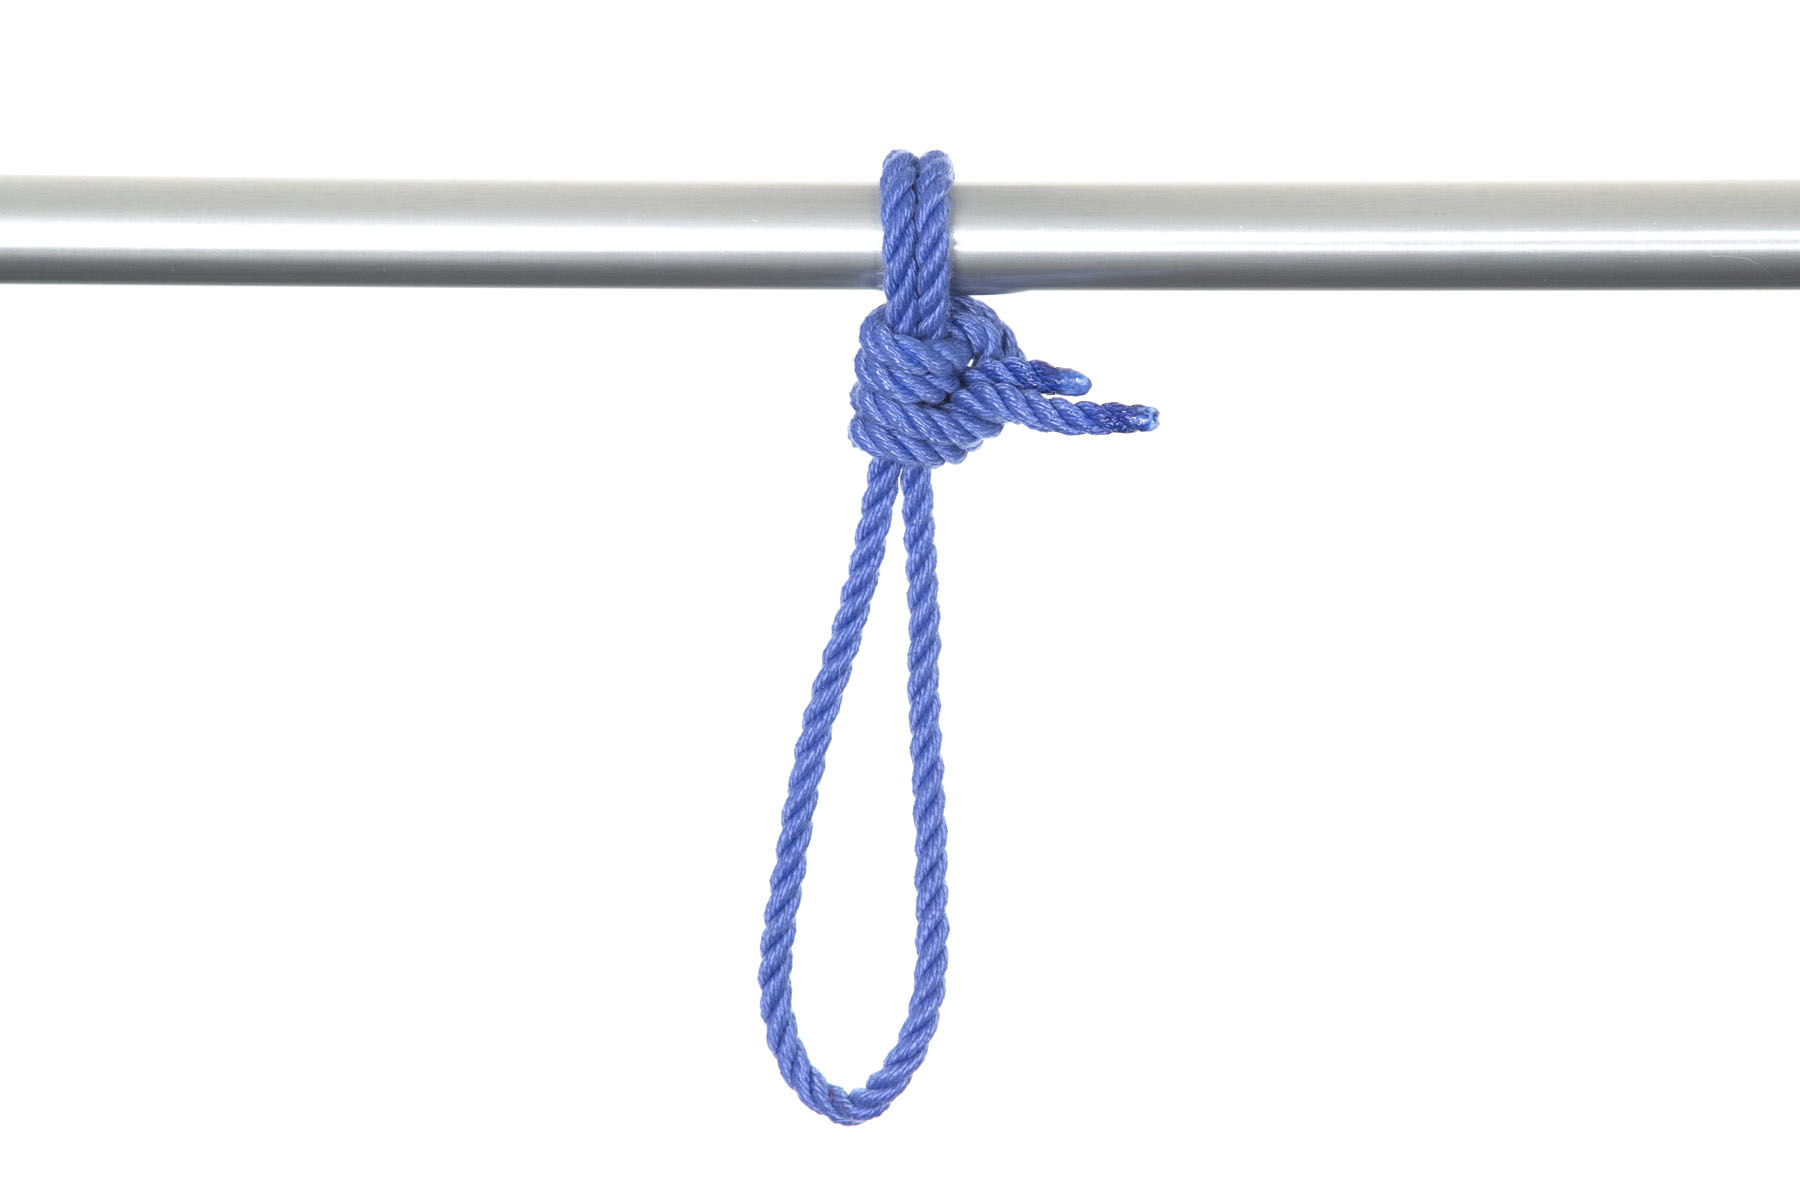 A length of one inch diameter aluminum pipe crosses the frame horizontally. A blue rope has been tied to it in a way that makes a six inch loop. The bight of the rope forms the loop and the tail of the rope goes around the pipe and then makes two half hitches around itself.